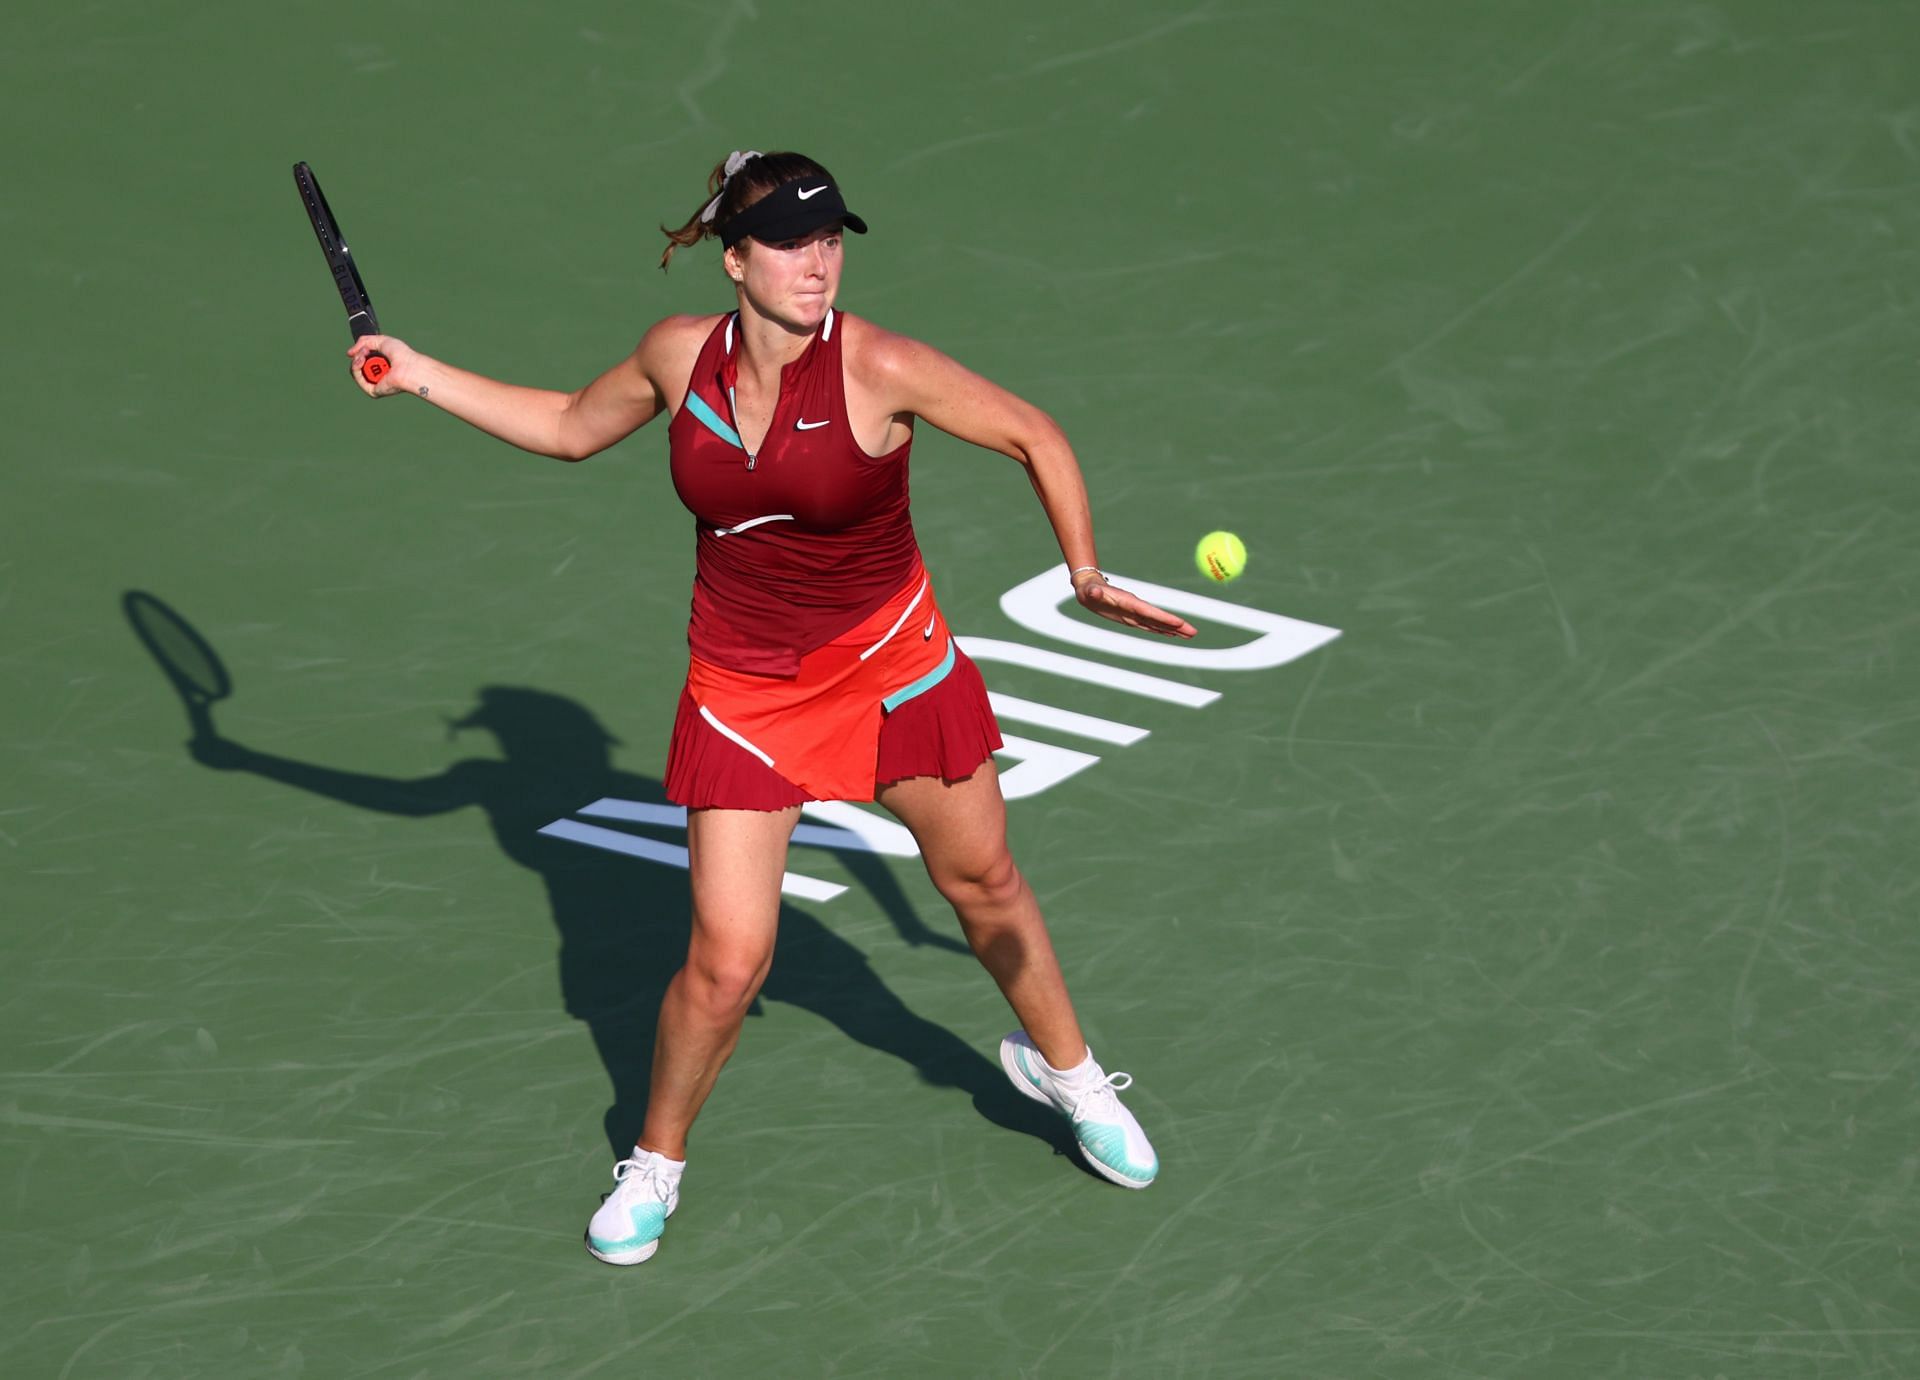 Elina Svitolina is seeded first at the Monterrey Open